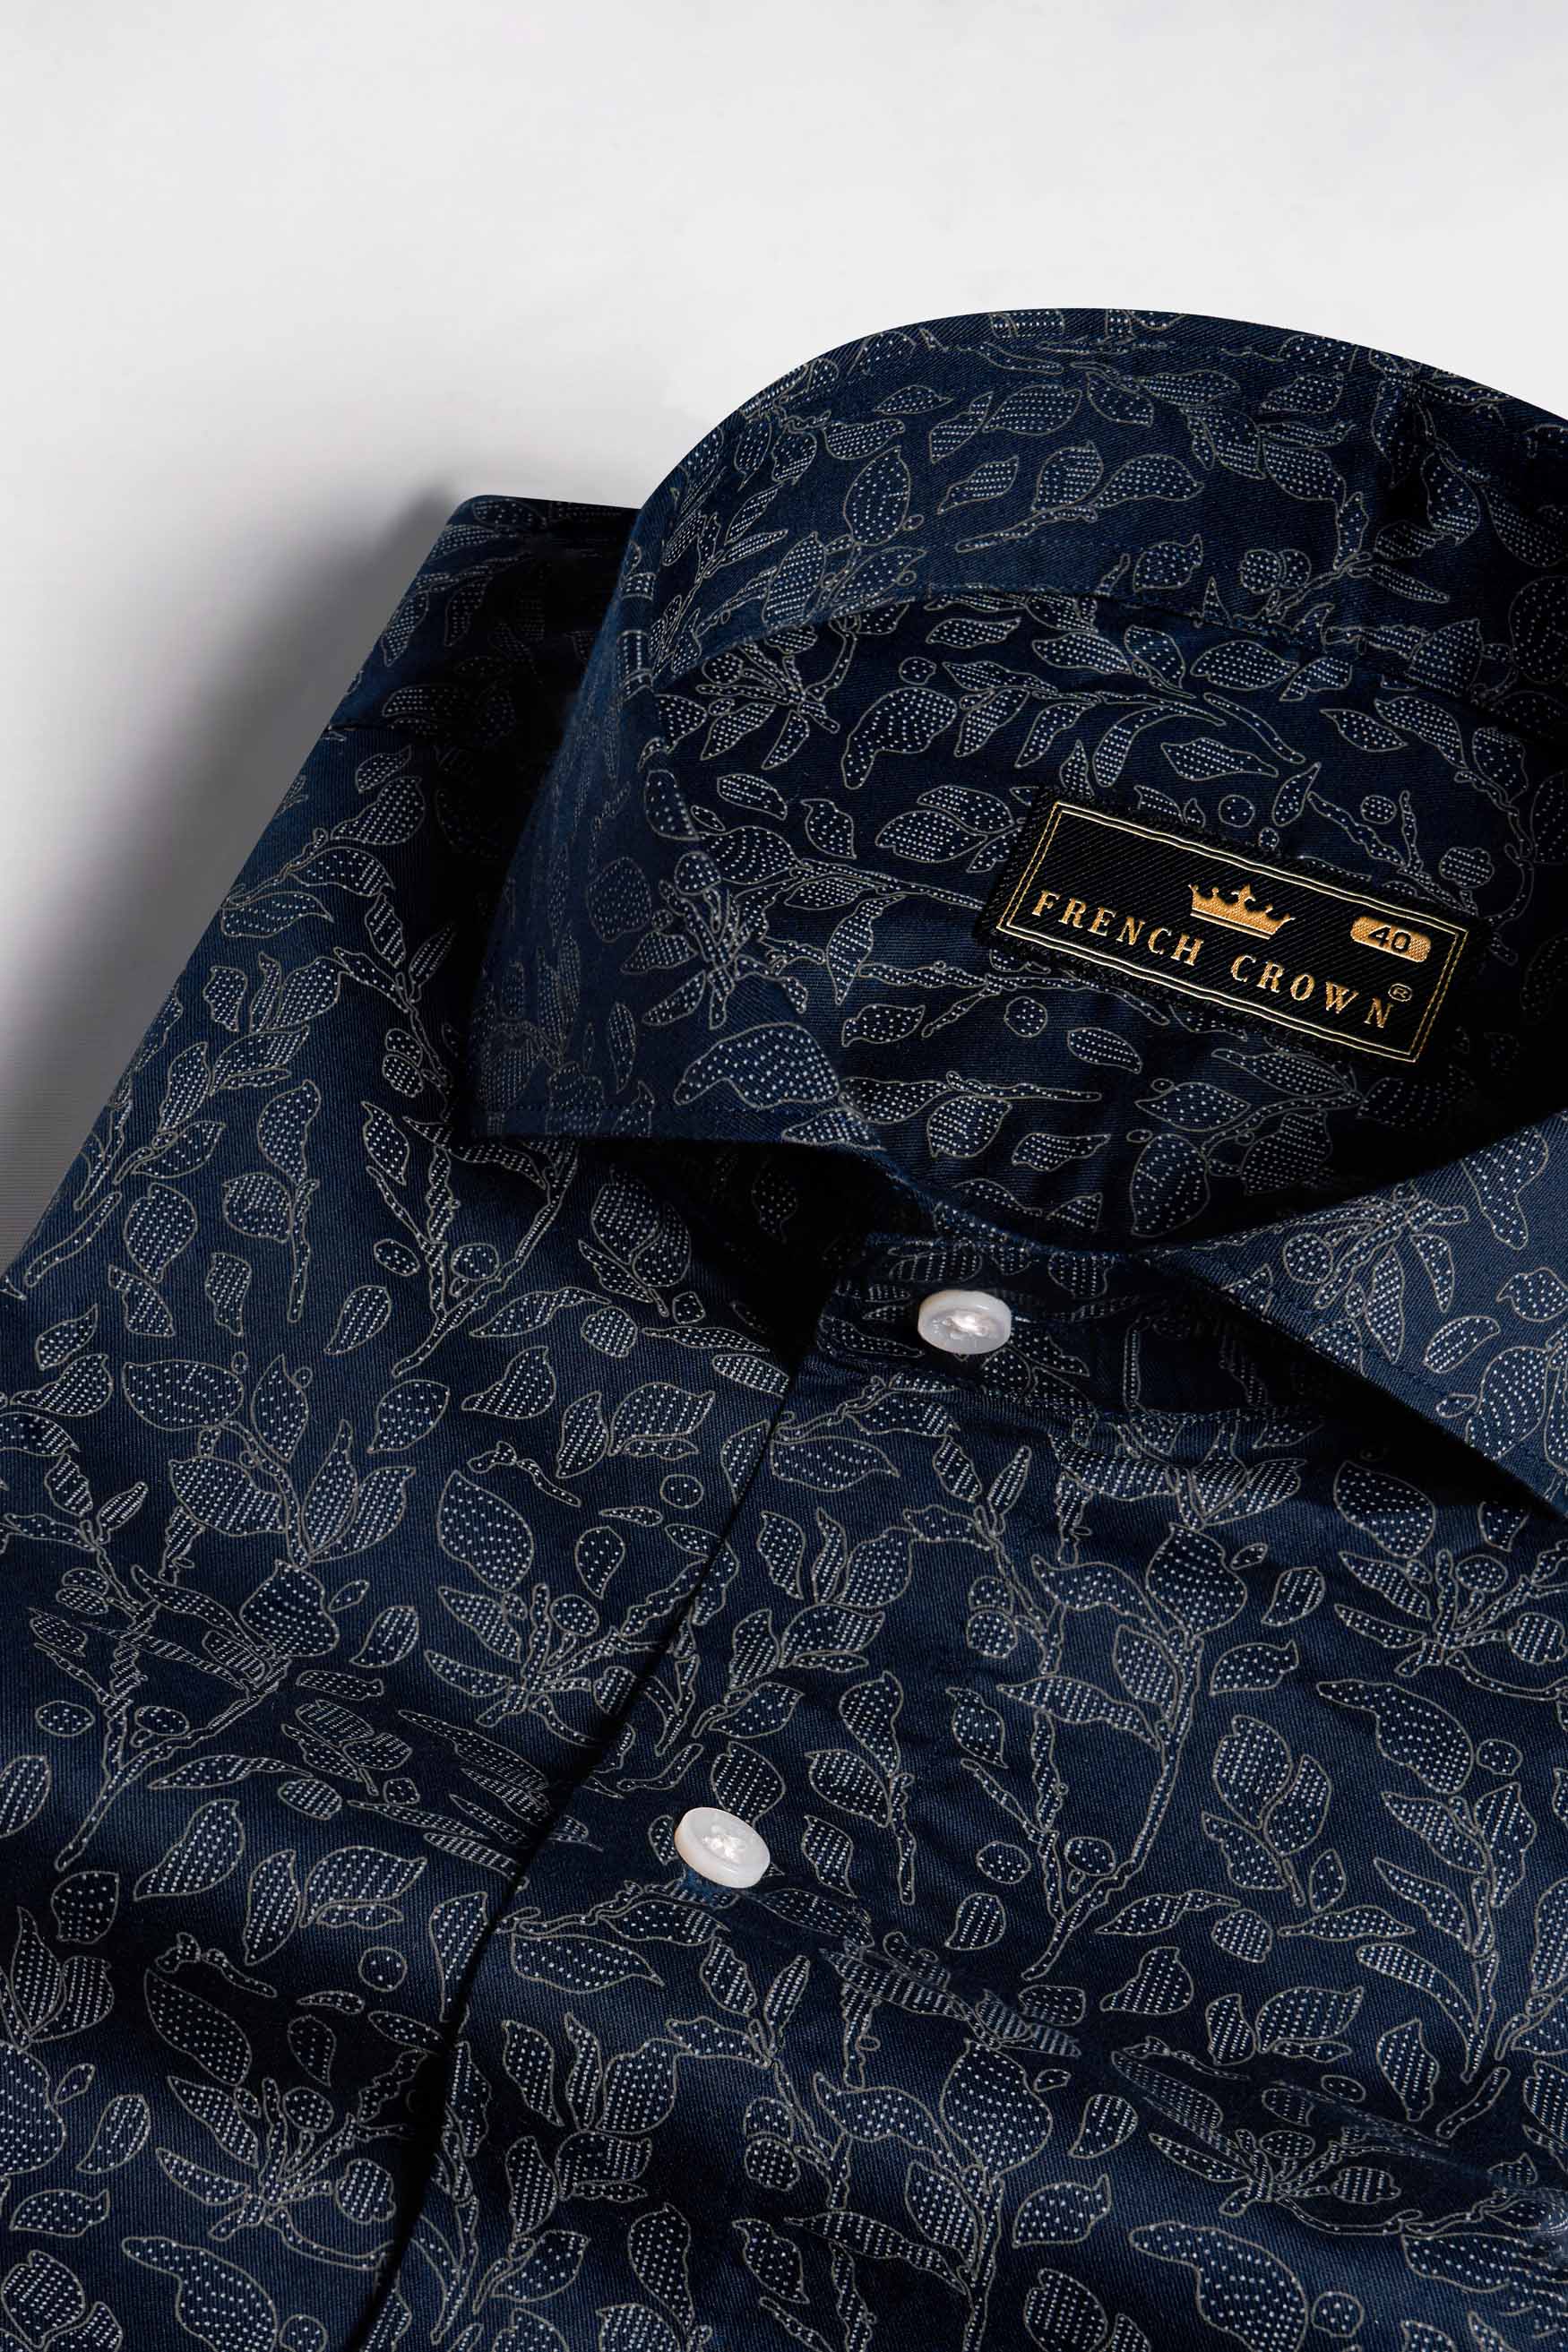 Onyx Blue with Cloudy Brown and White Leaves Printed Twill Premium Cotton Shirt